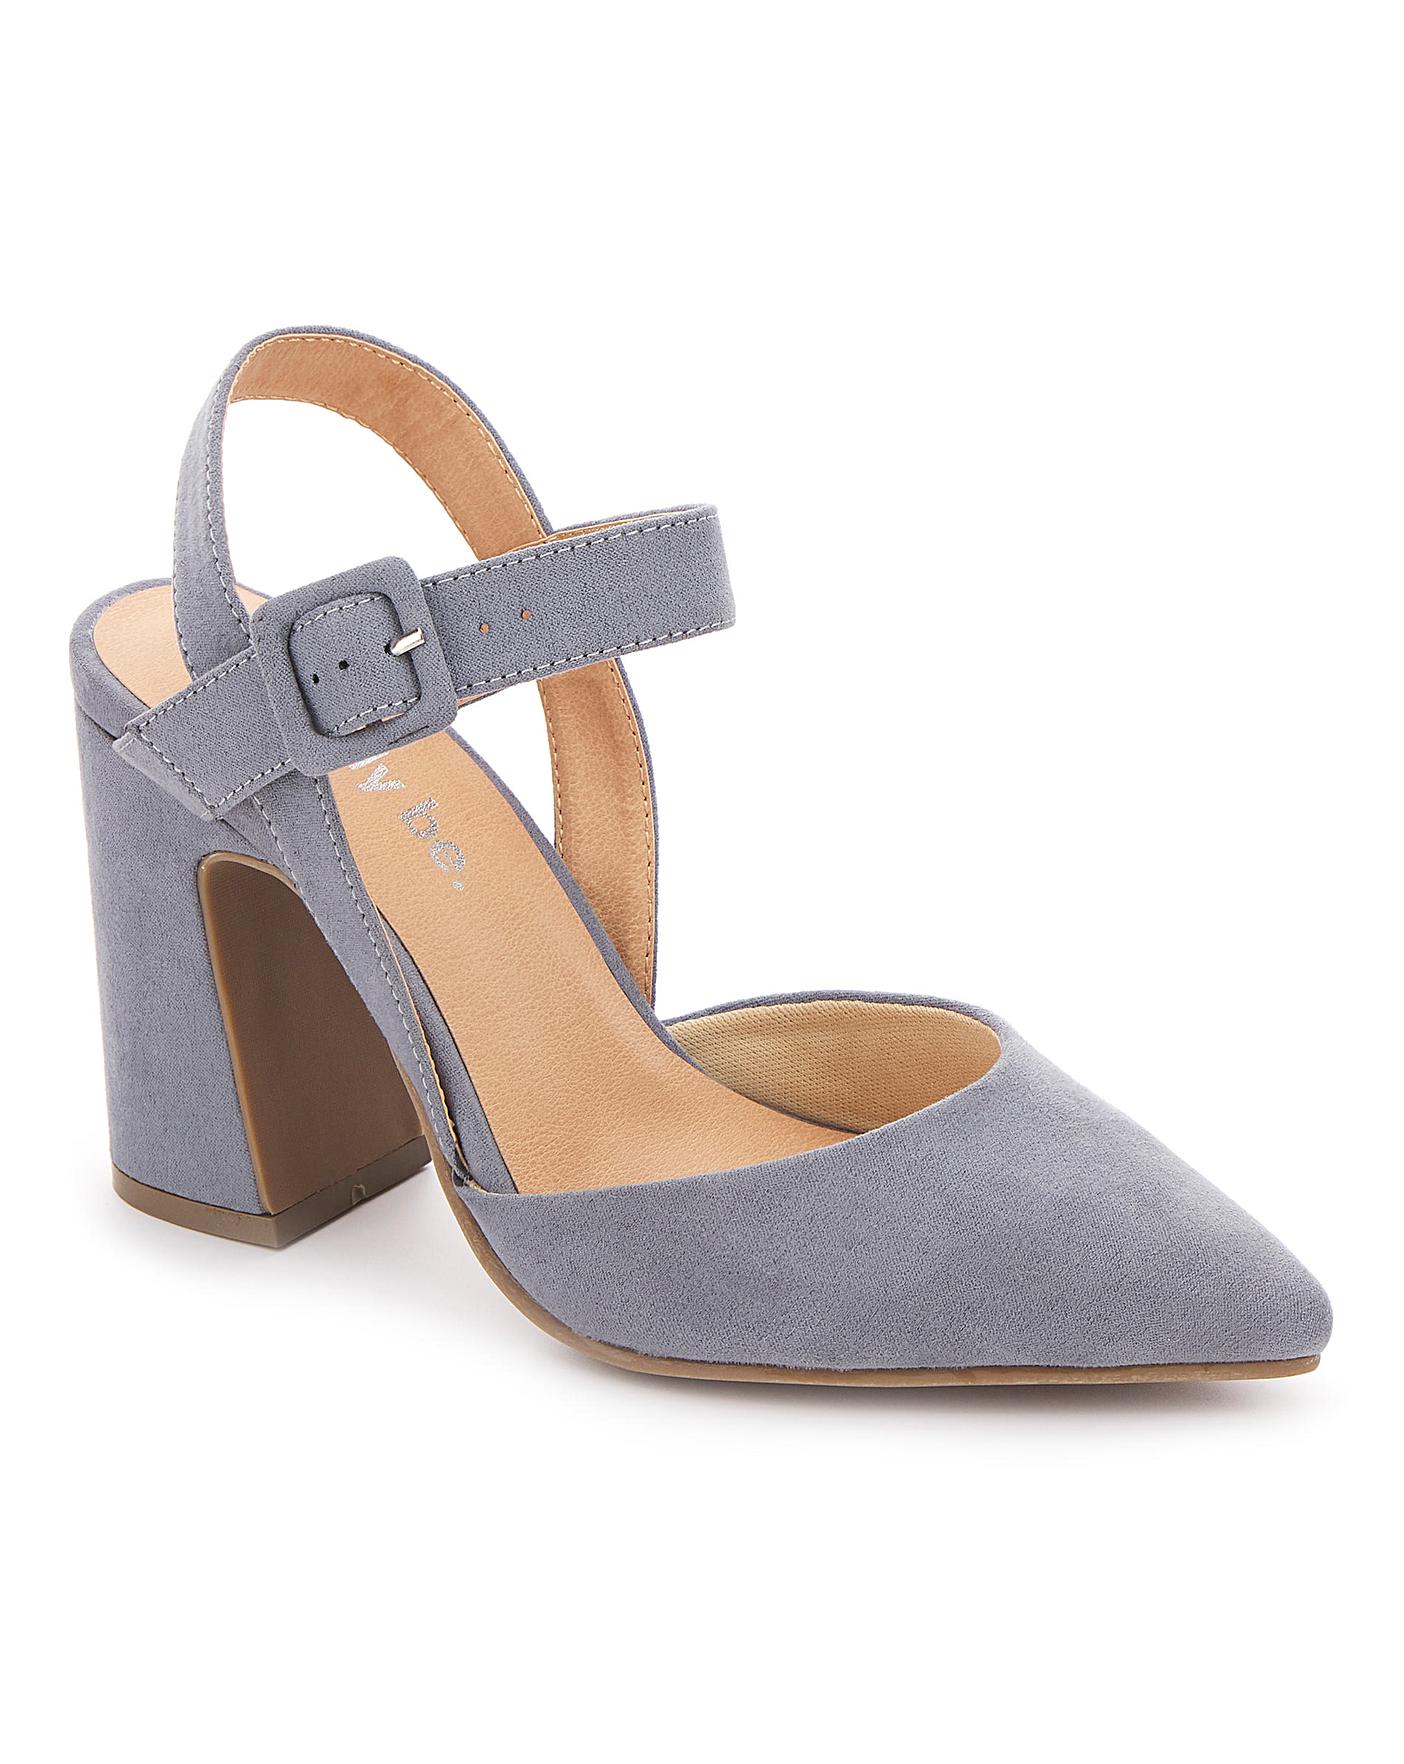 grey court shoes wide fit